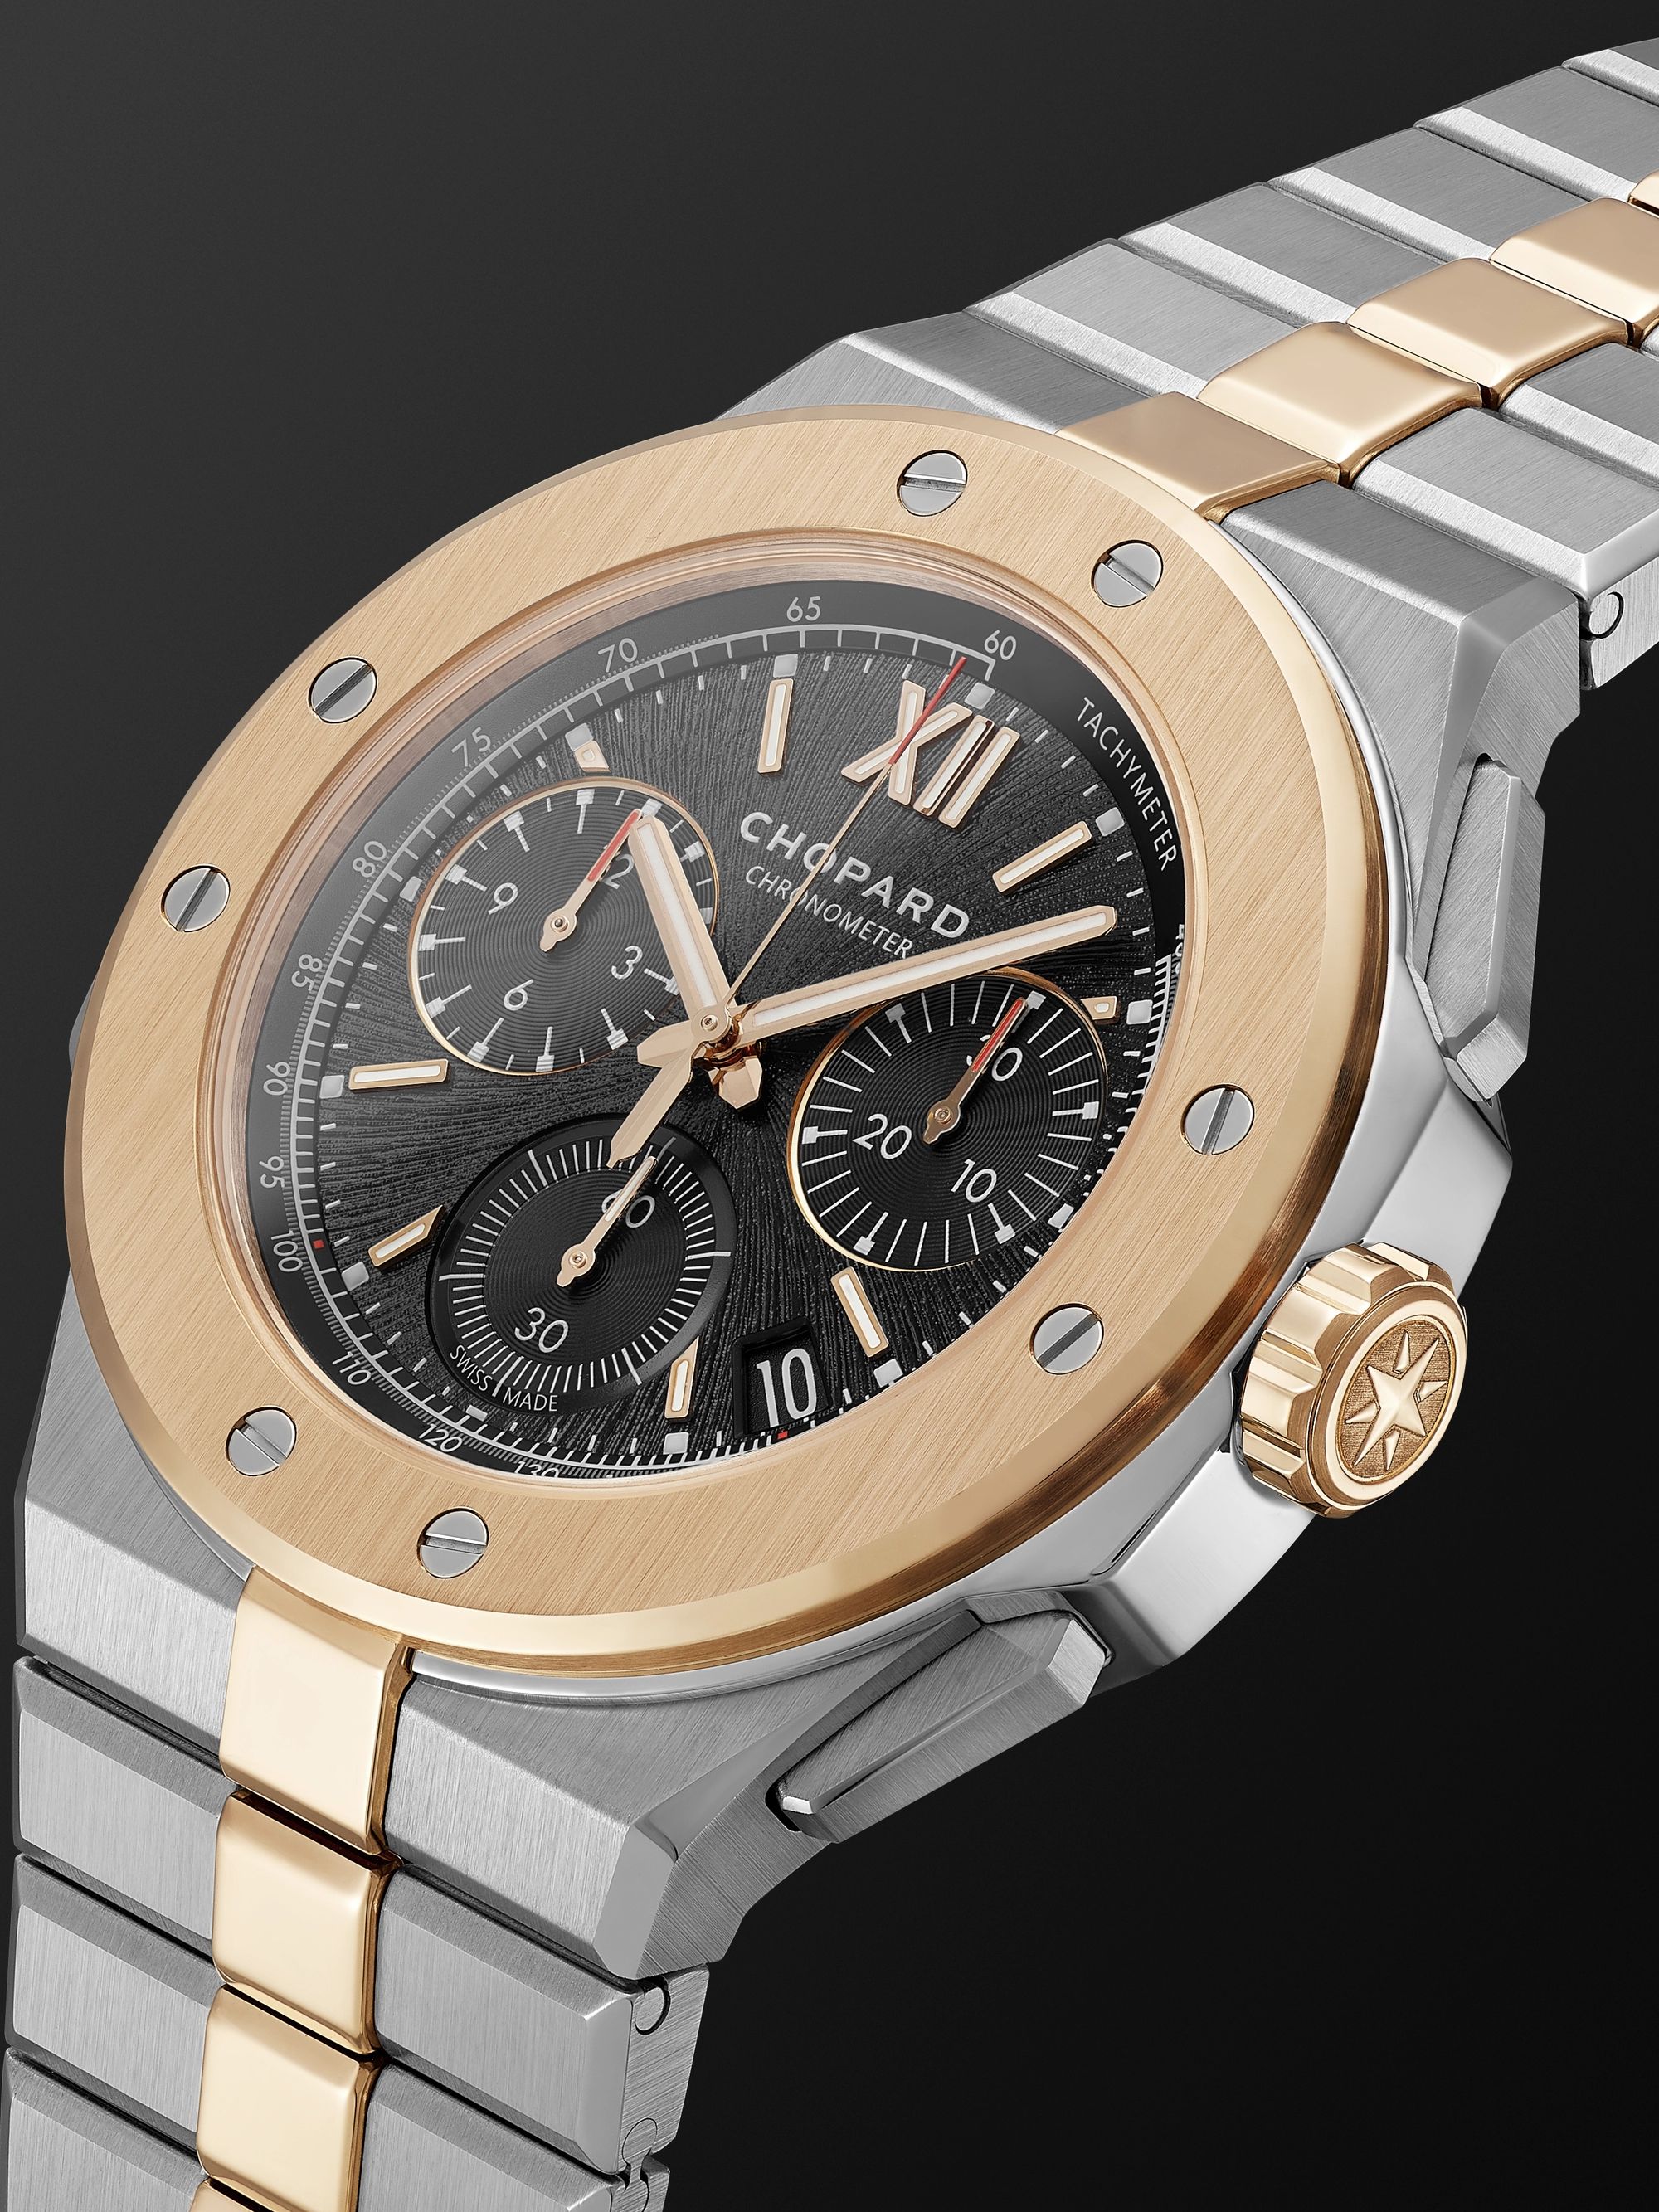 CHOPARD Alpine Eagle XL Chrono Automatic 44mm Lucent Steel and 18-Karat Rose Gold Watch, Ref. No. 298609-6001